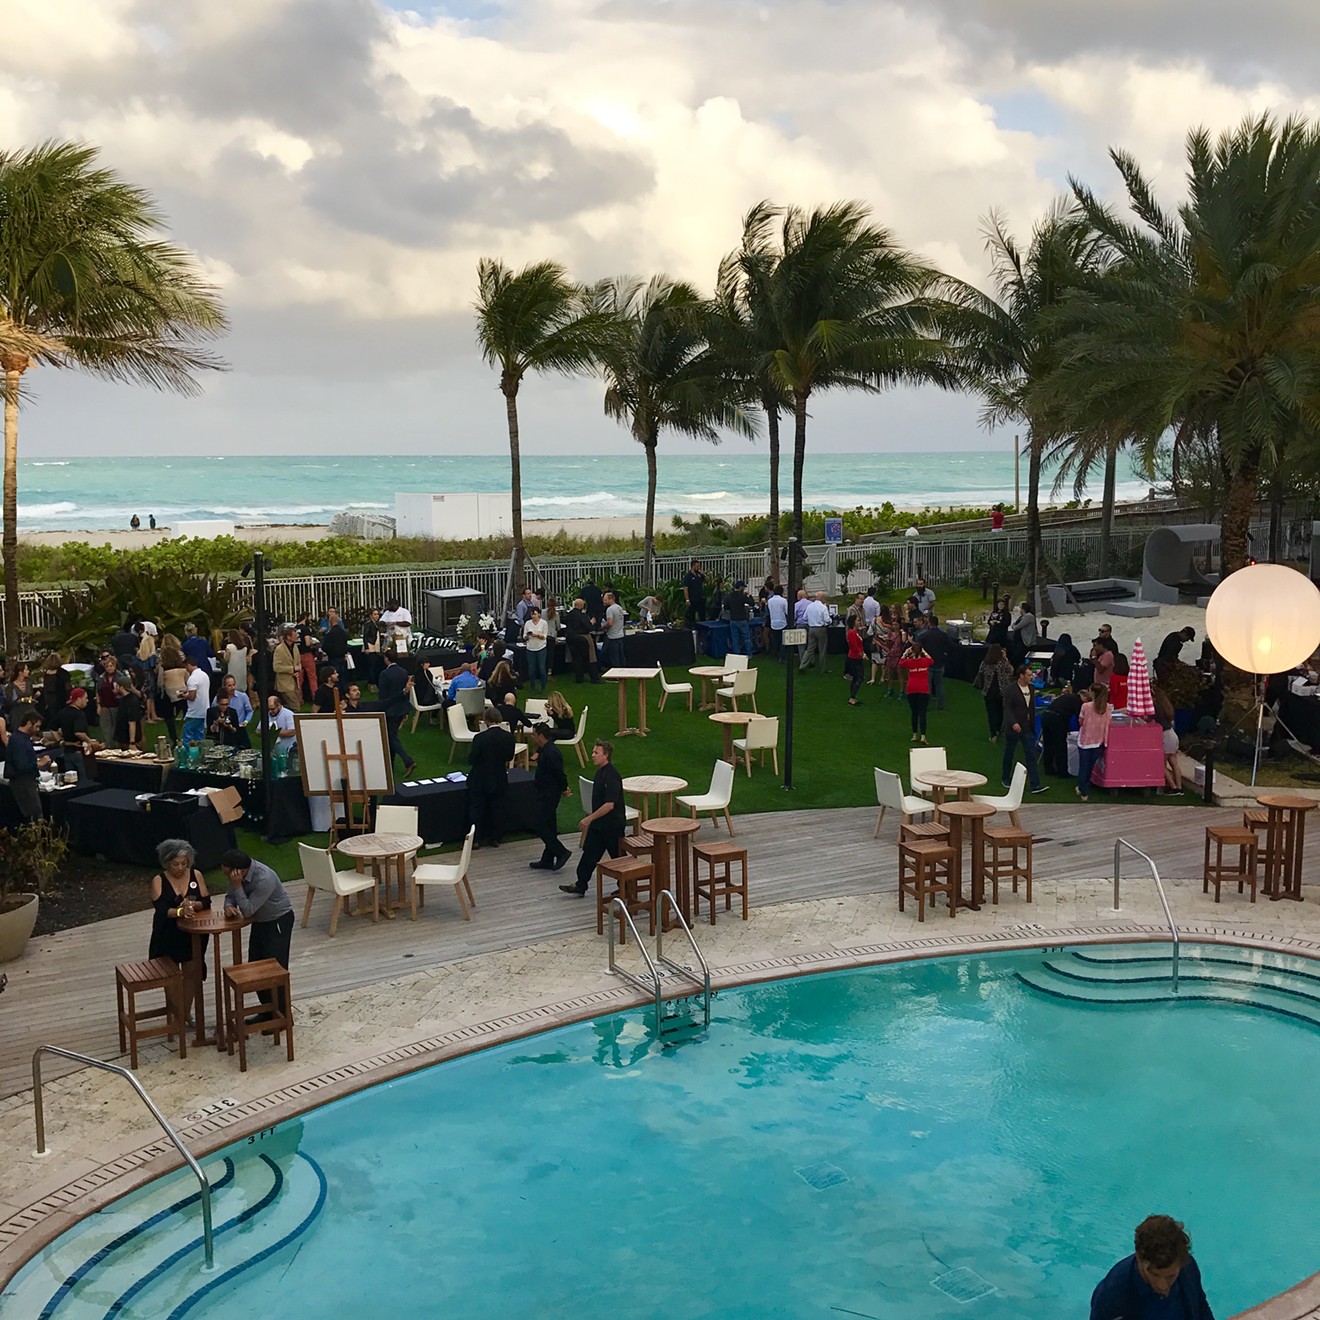 The Eden Roc:  A sublime backdrop for the sixth-annual Slow Food "Snail of Approval" Tasting Party.